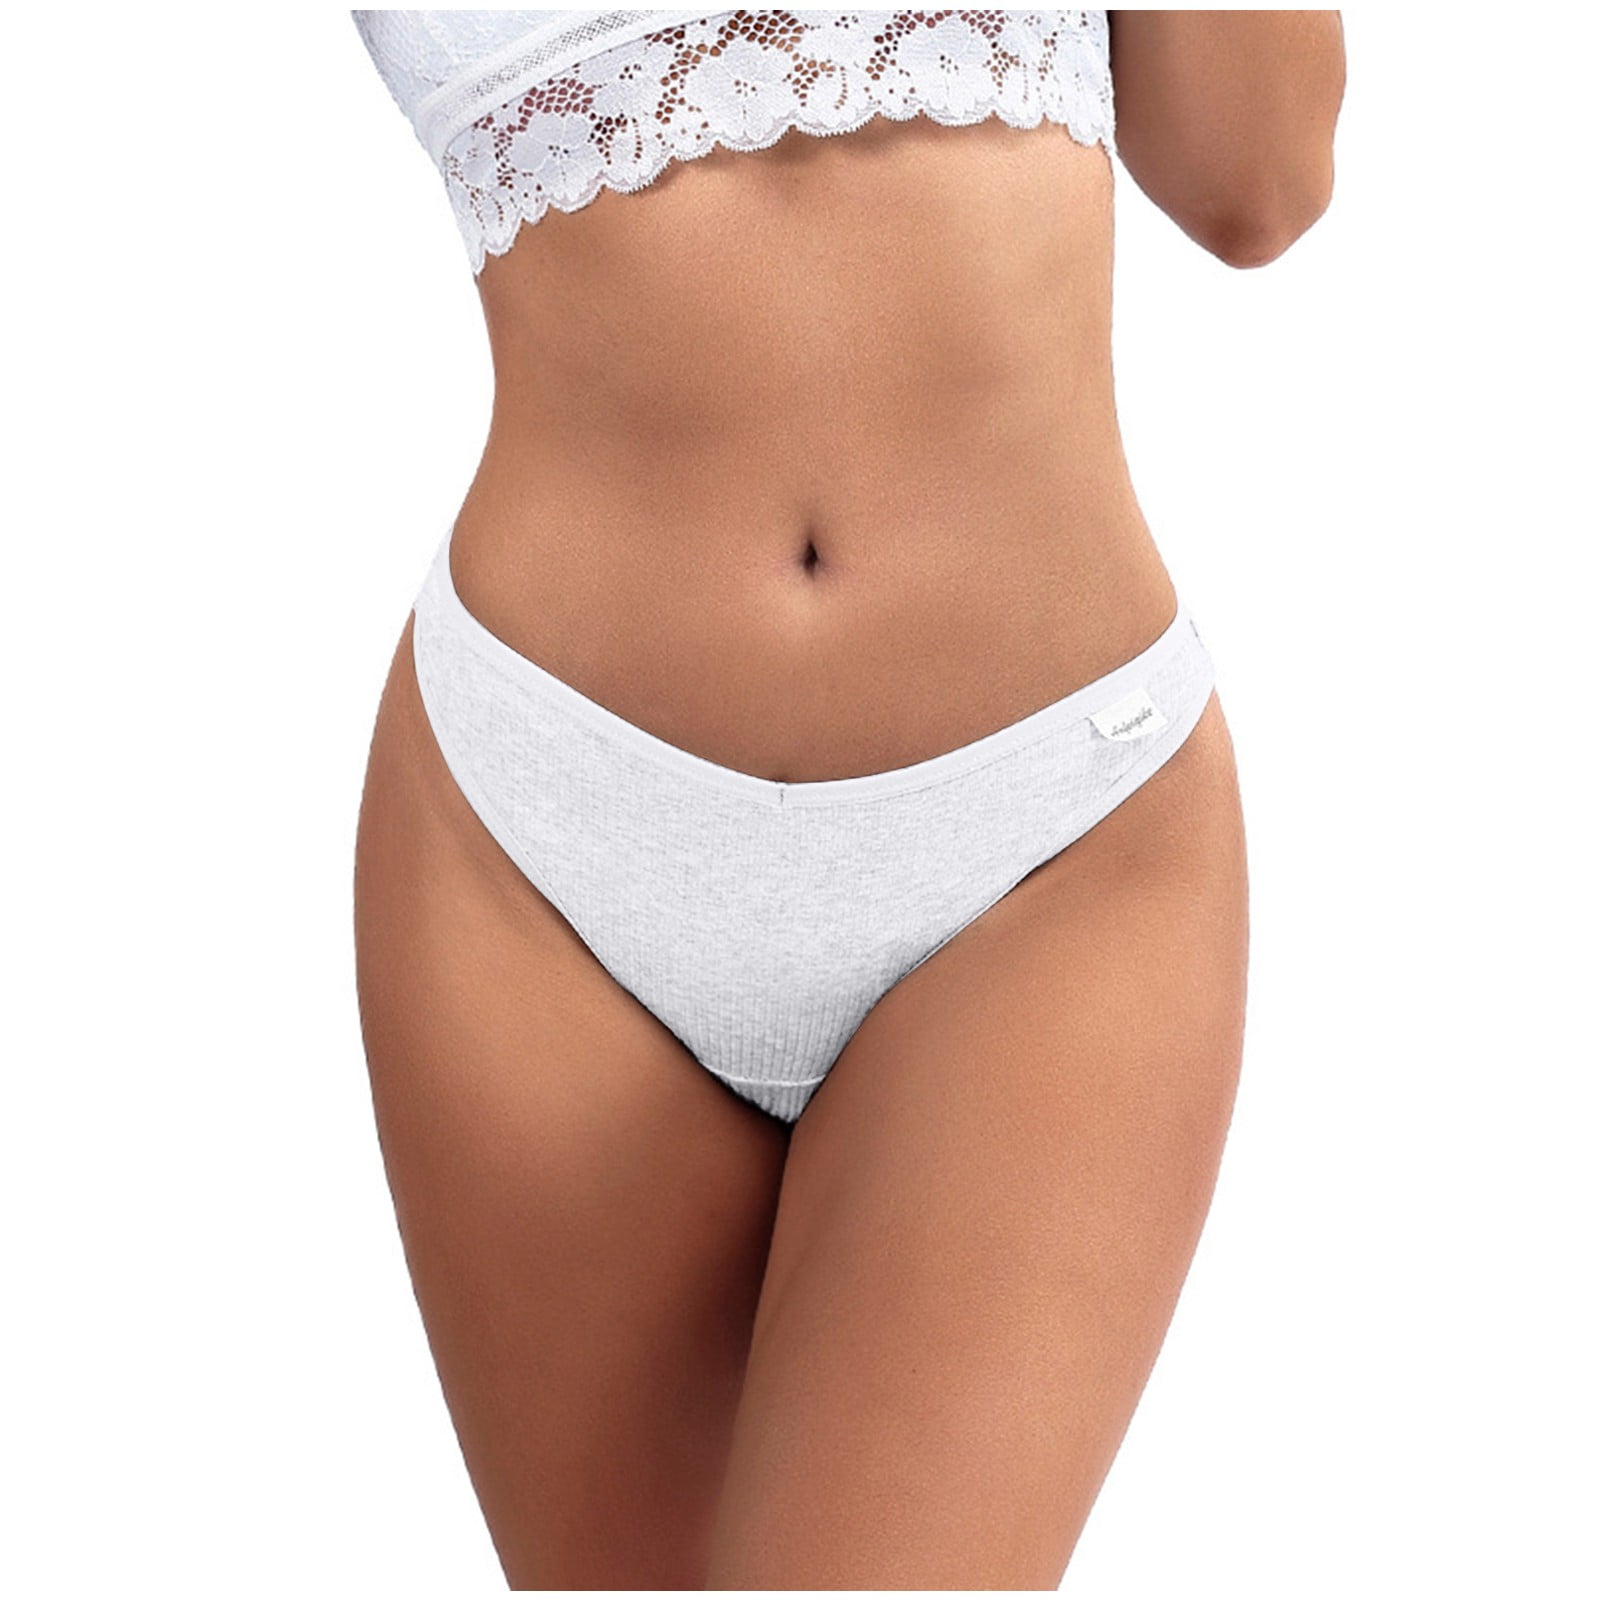 Knosfe Cute Panties for Teen Girls Seamless T-Back Cotton Low